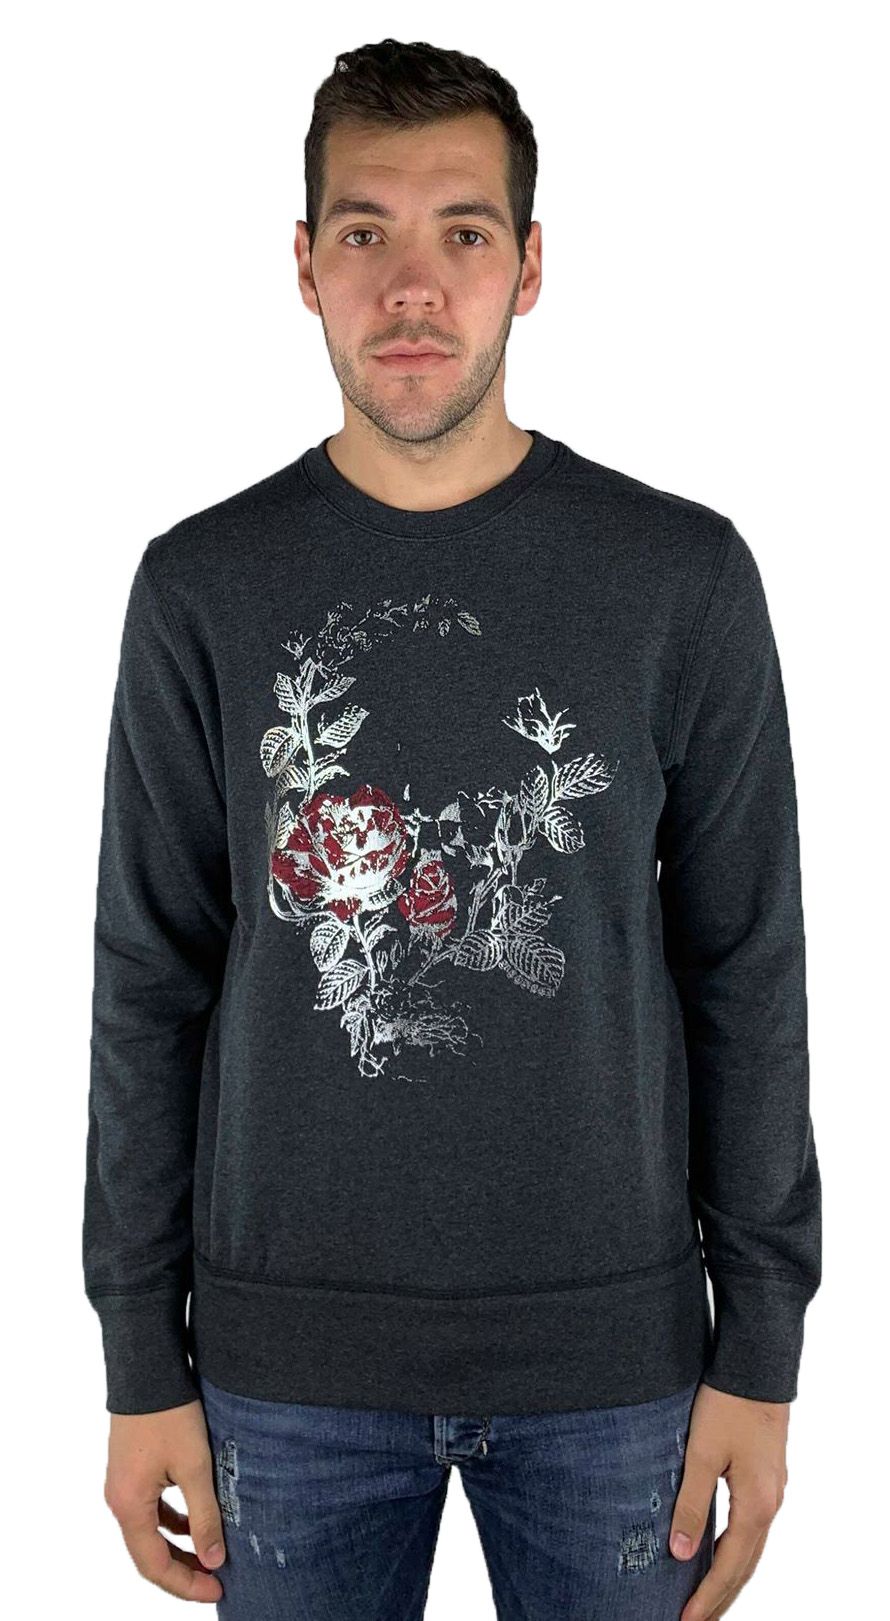 Alexander McQueen 520323 QLZ94 0922 Sweater. Jumper Sweatshirt With Ribbed Cuffs and Hem. Skull and Rose Print. Elasticated Sleeve and Waist Endings. Crew Neck Sweater. 100% Cotton, Made In Italy